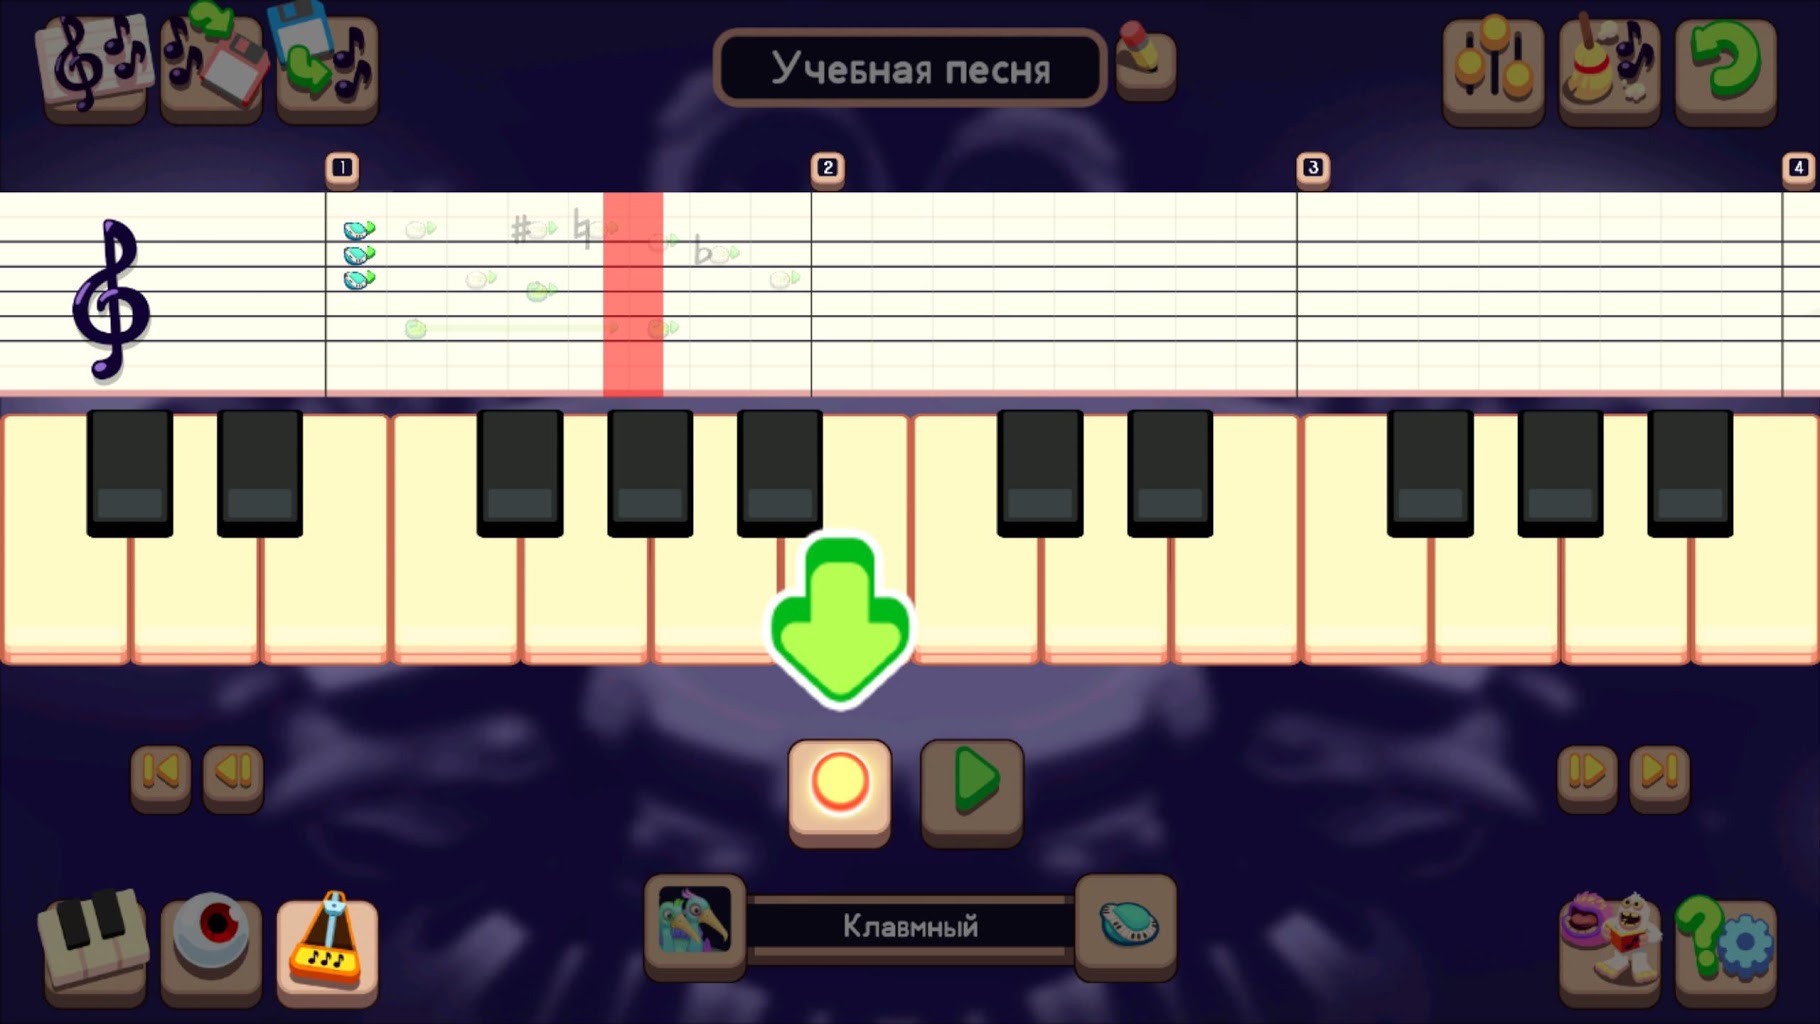 Composer download the last version for android